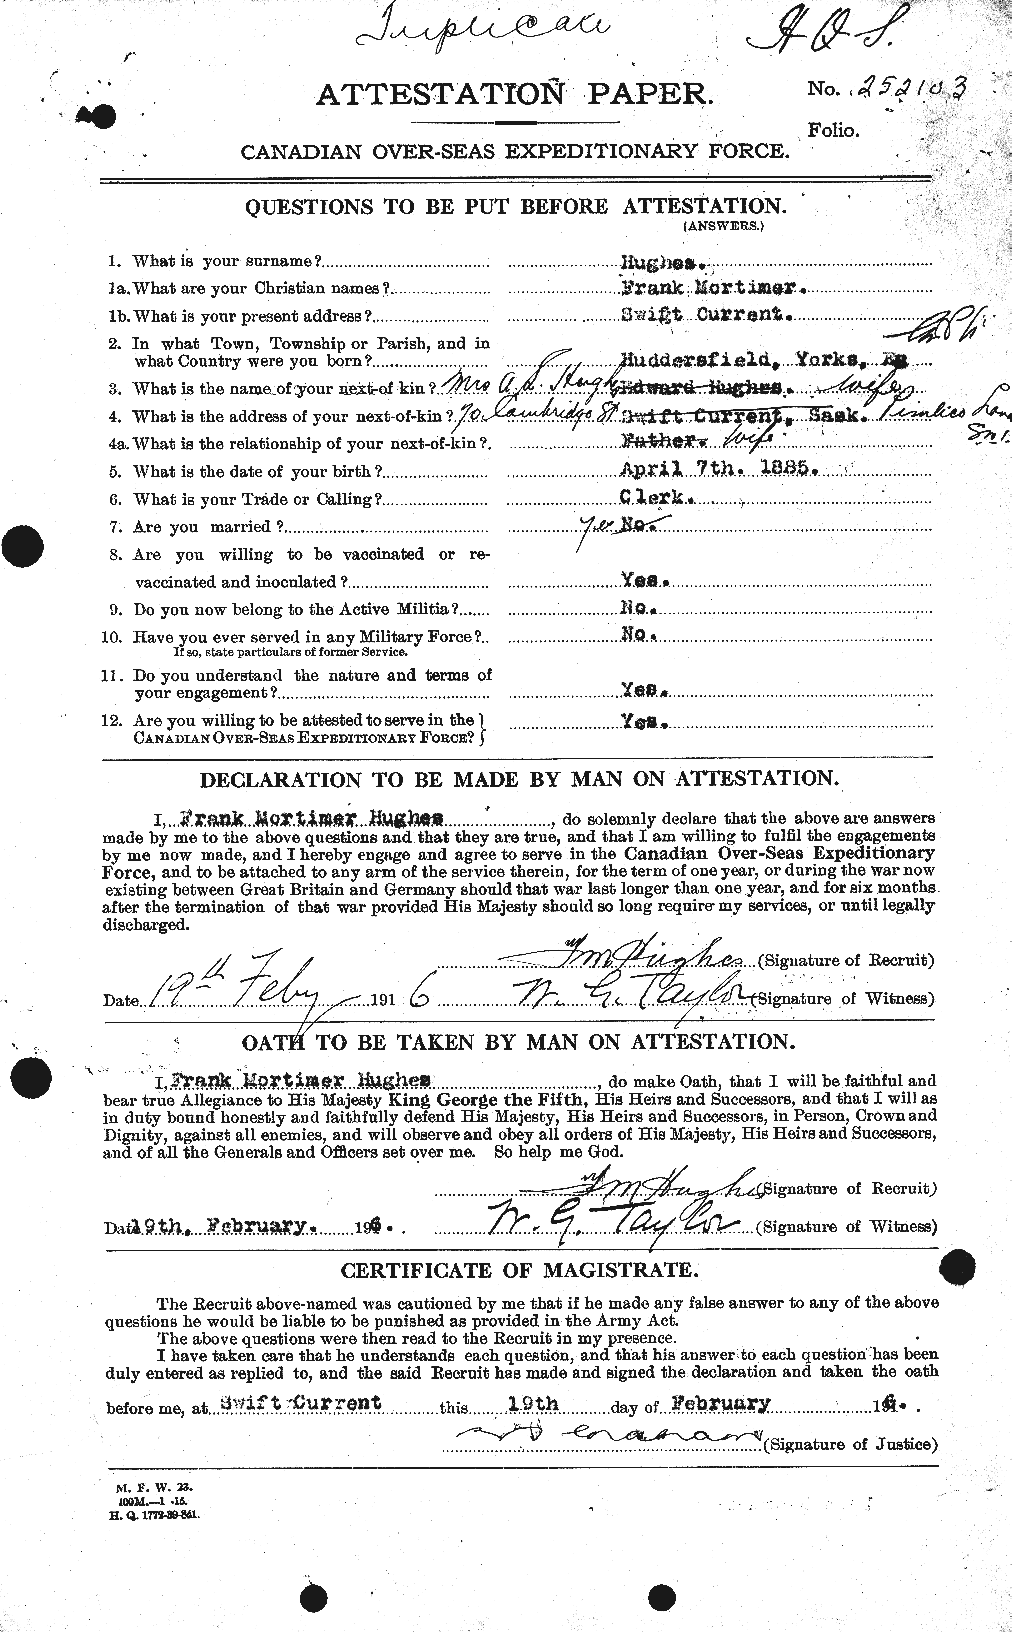 Personnel Records of the First World War - CEF 403780a